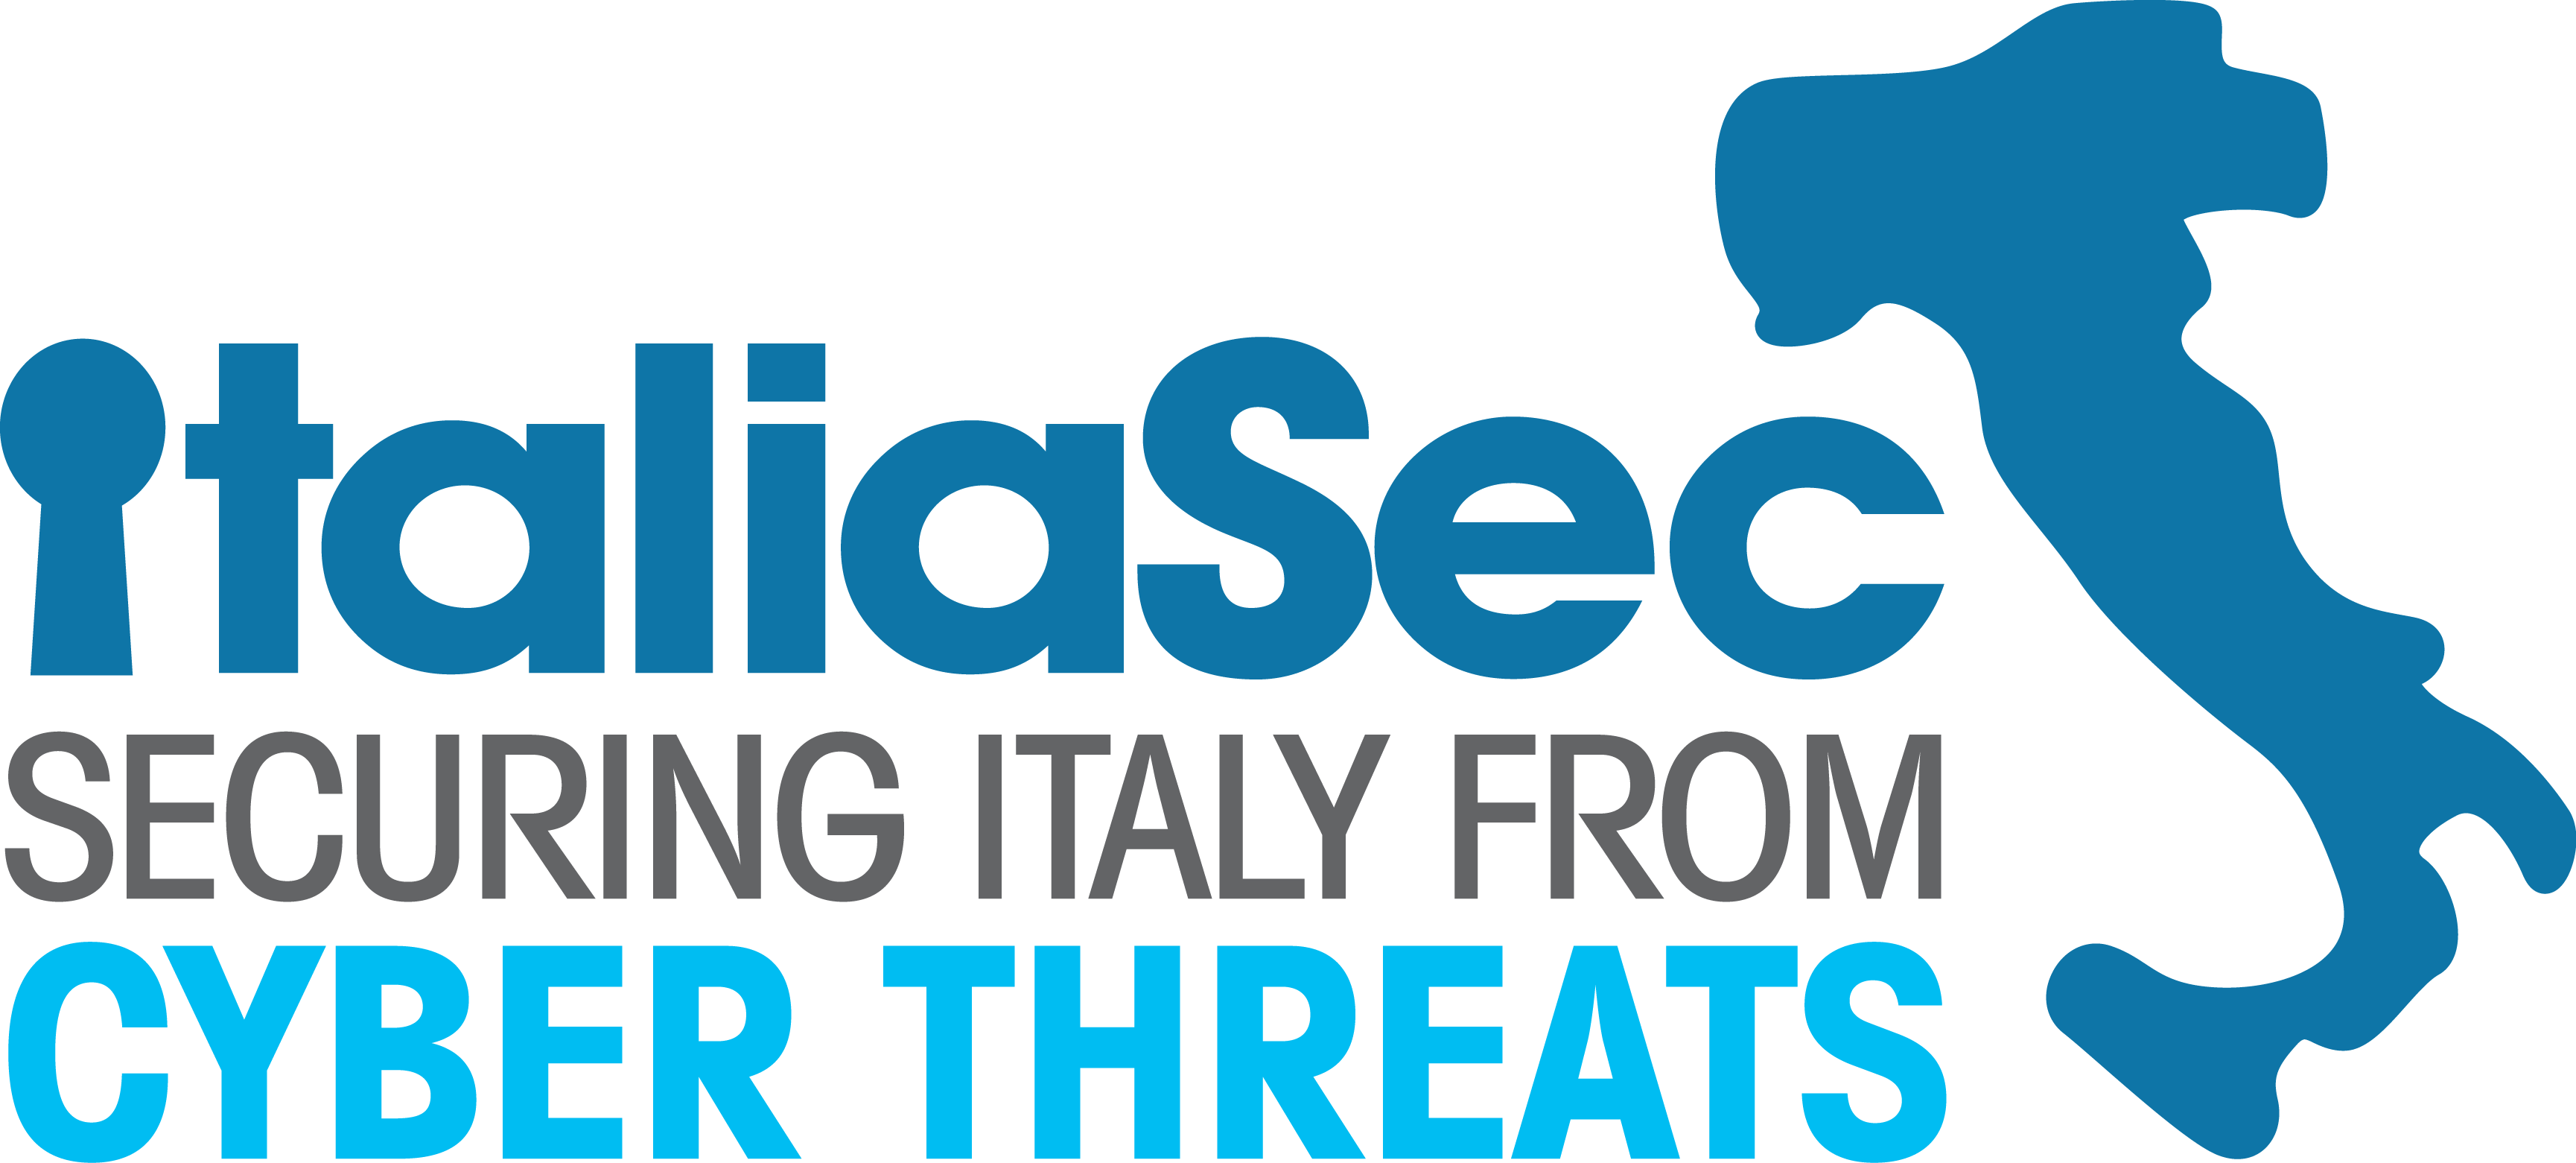 ItaliaSec IT Security Conference